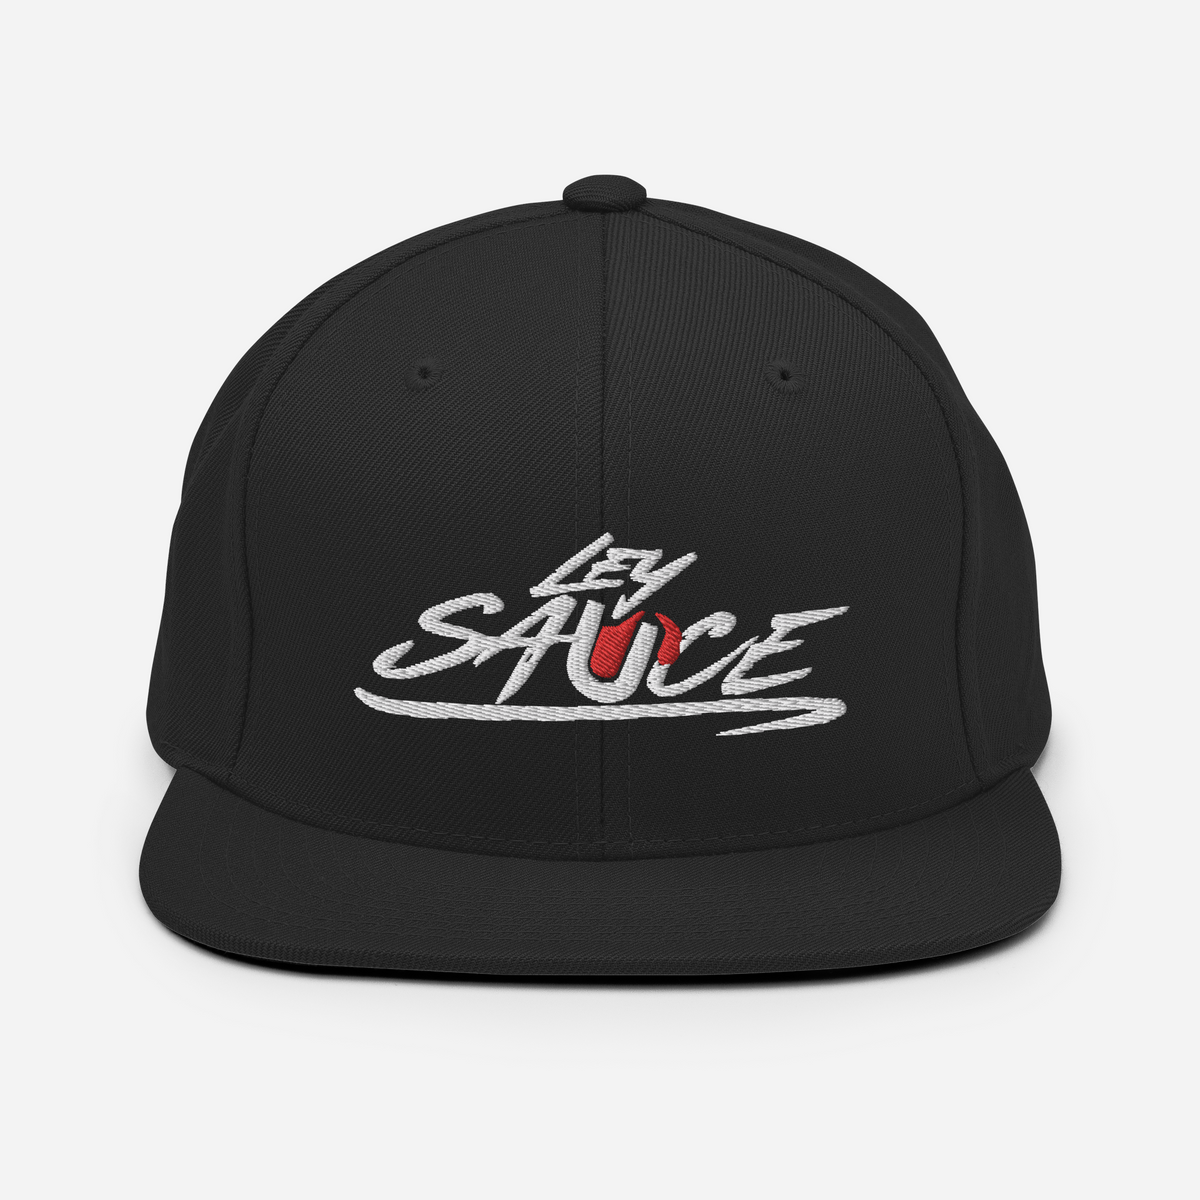 LeySauce | On Demand | Embroidered Snapback Hat